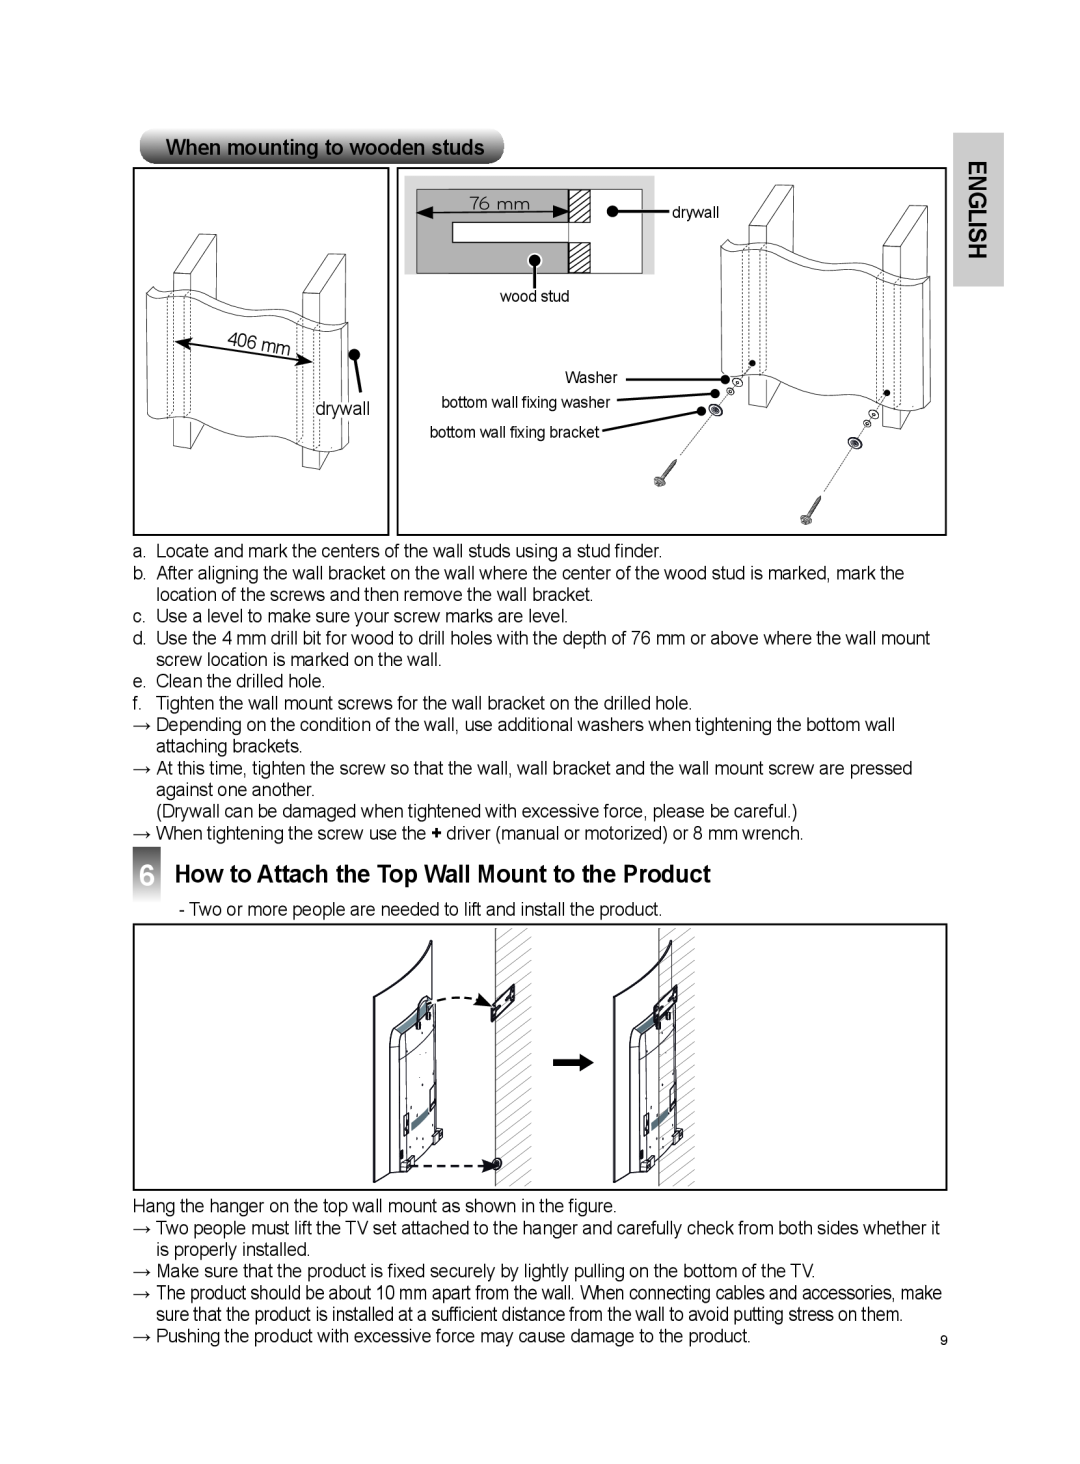 LG Electronics OSW100 How to Attach the Top Wall Mount to the Product, When mounting to wooden studs, English 